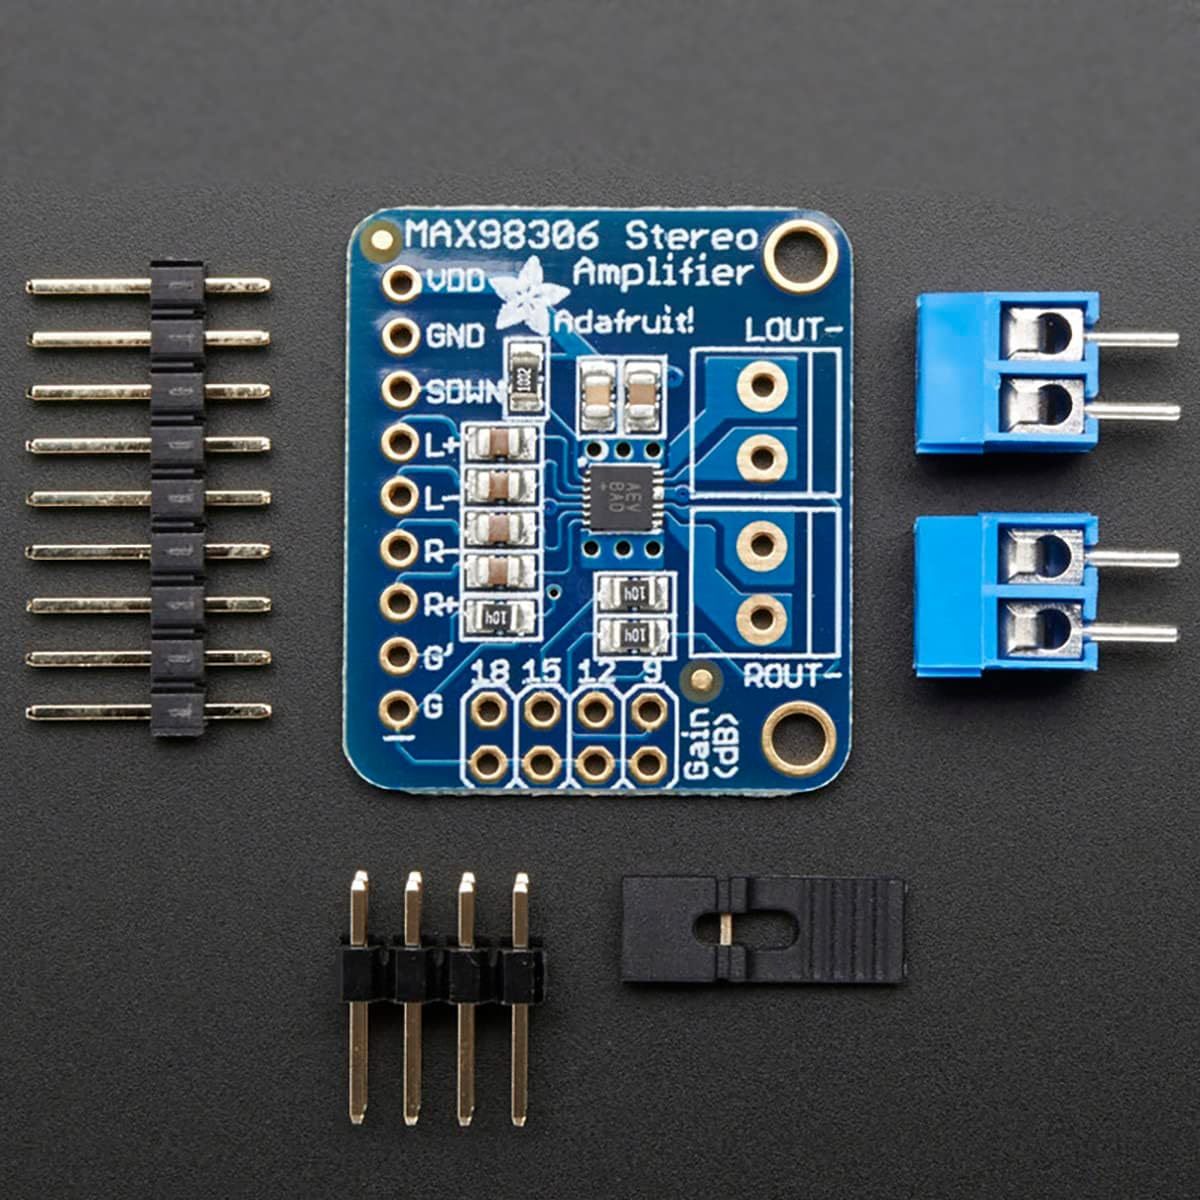 Primary image for Stereo 3.7W Class D Audio Amplifier, Audio Ic Development Tools (1 Unit).